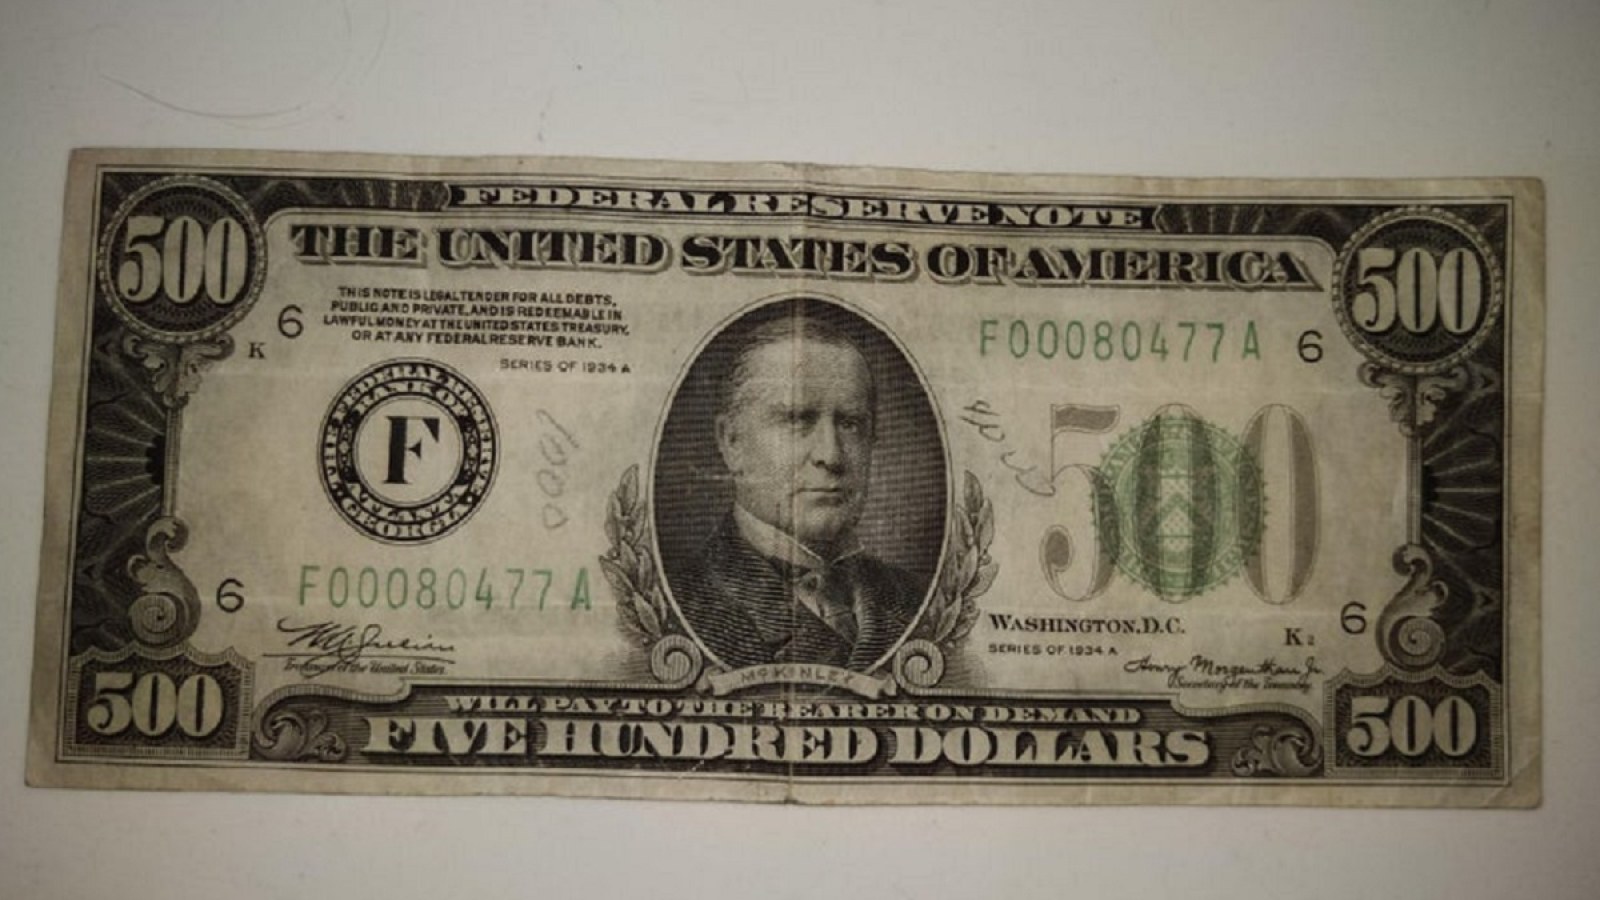 Grover Cleveland $1000 United States Federal Reserve Note 1934